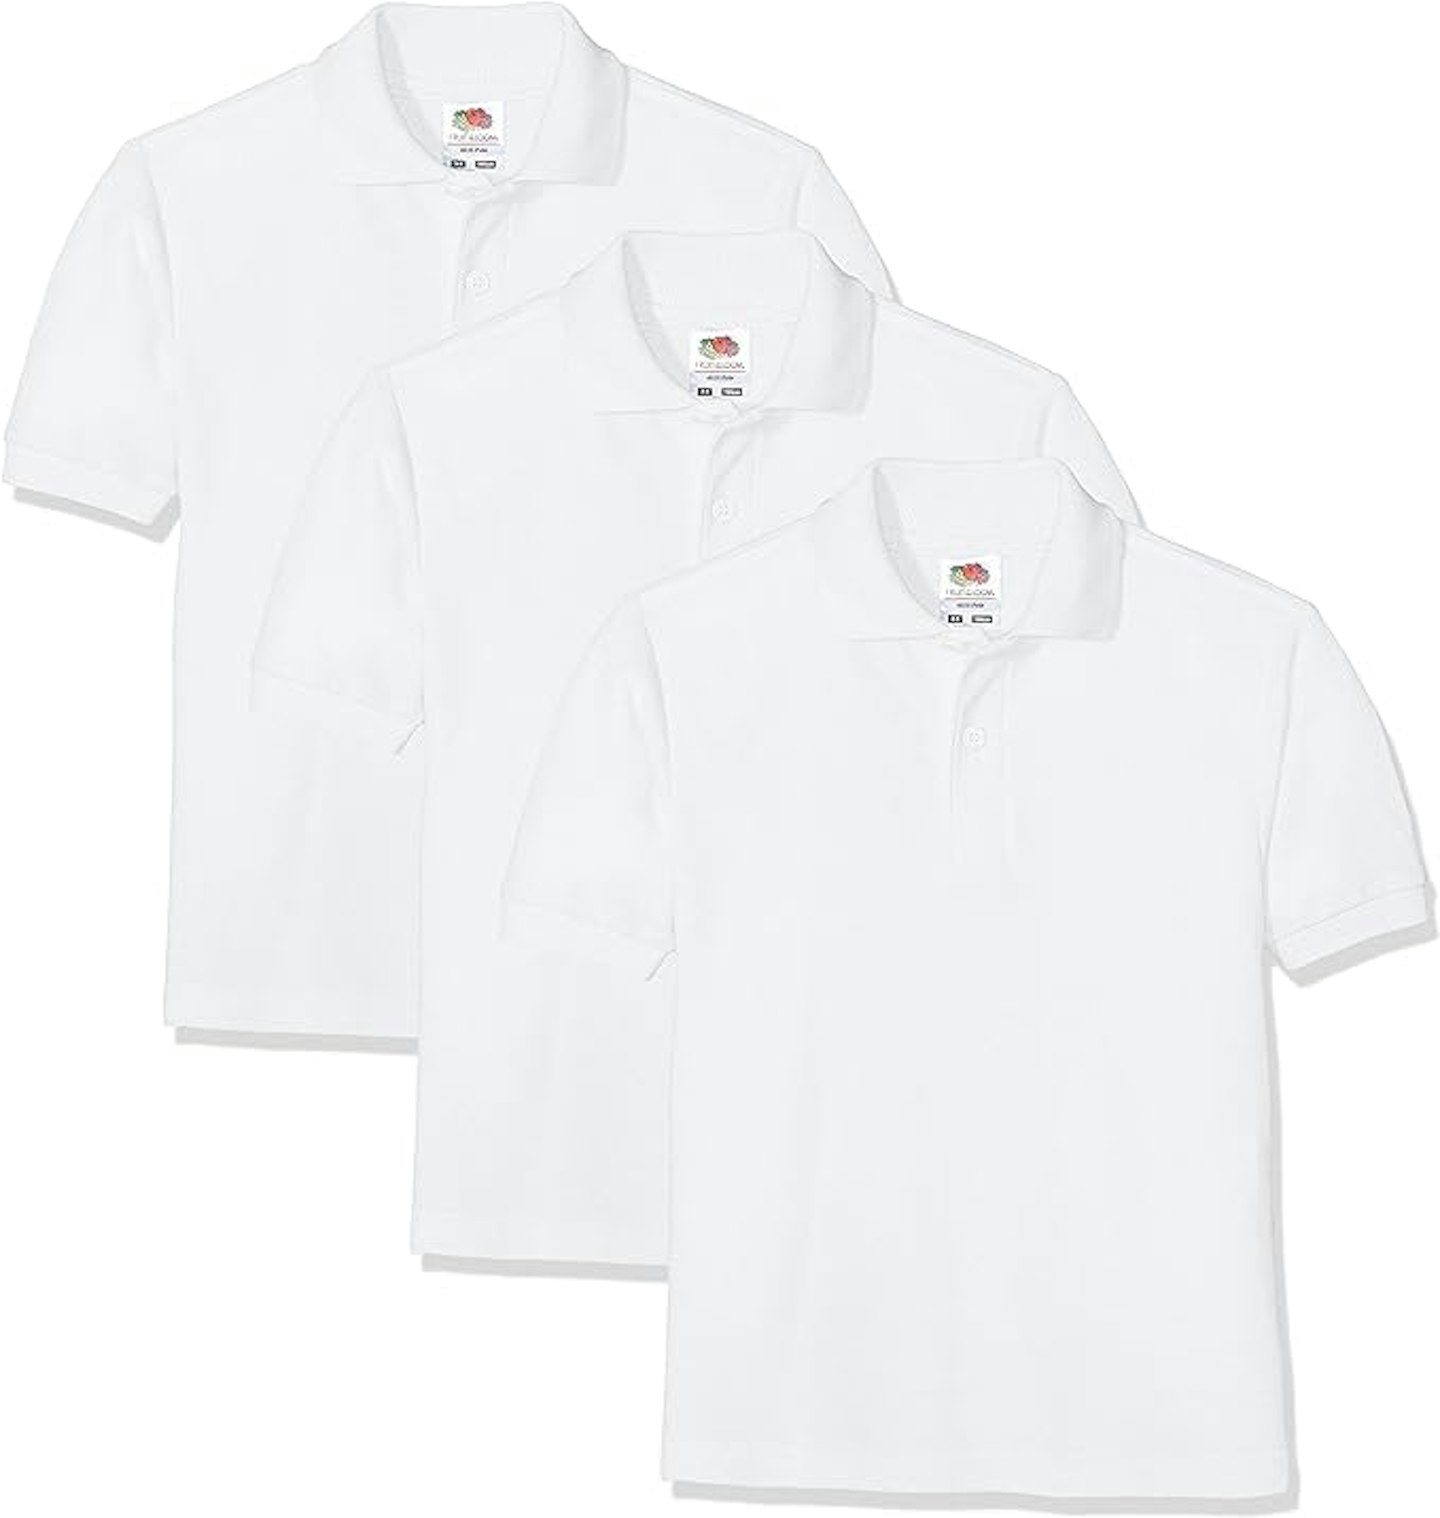 Fruit of the Loom Baby Short Sleeve Polo Shirt (Pack of 3)